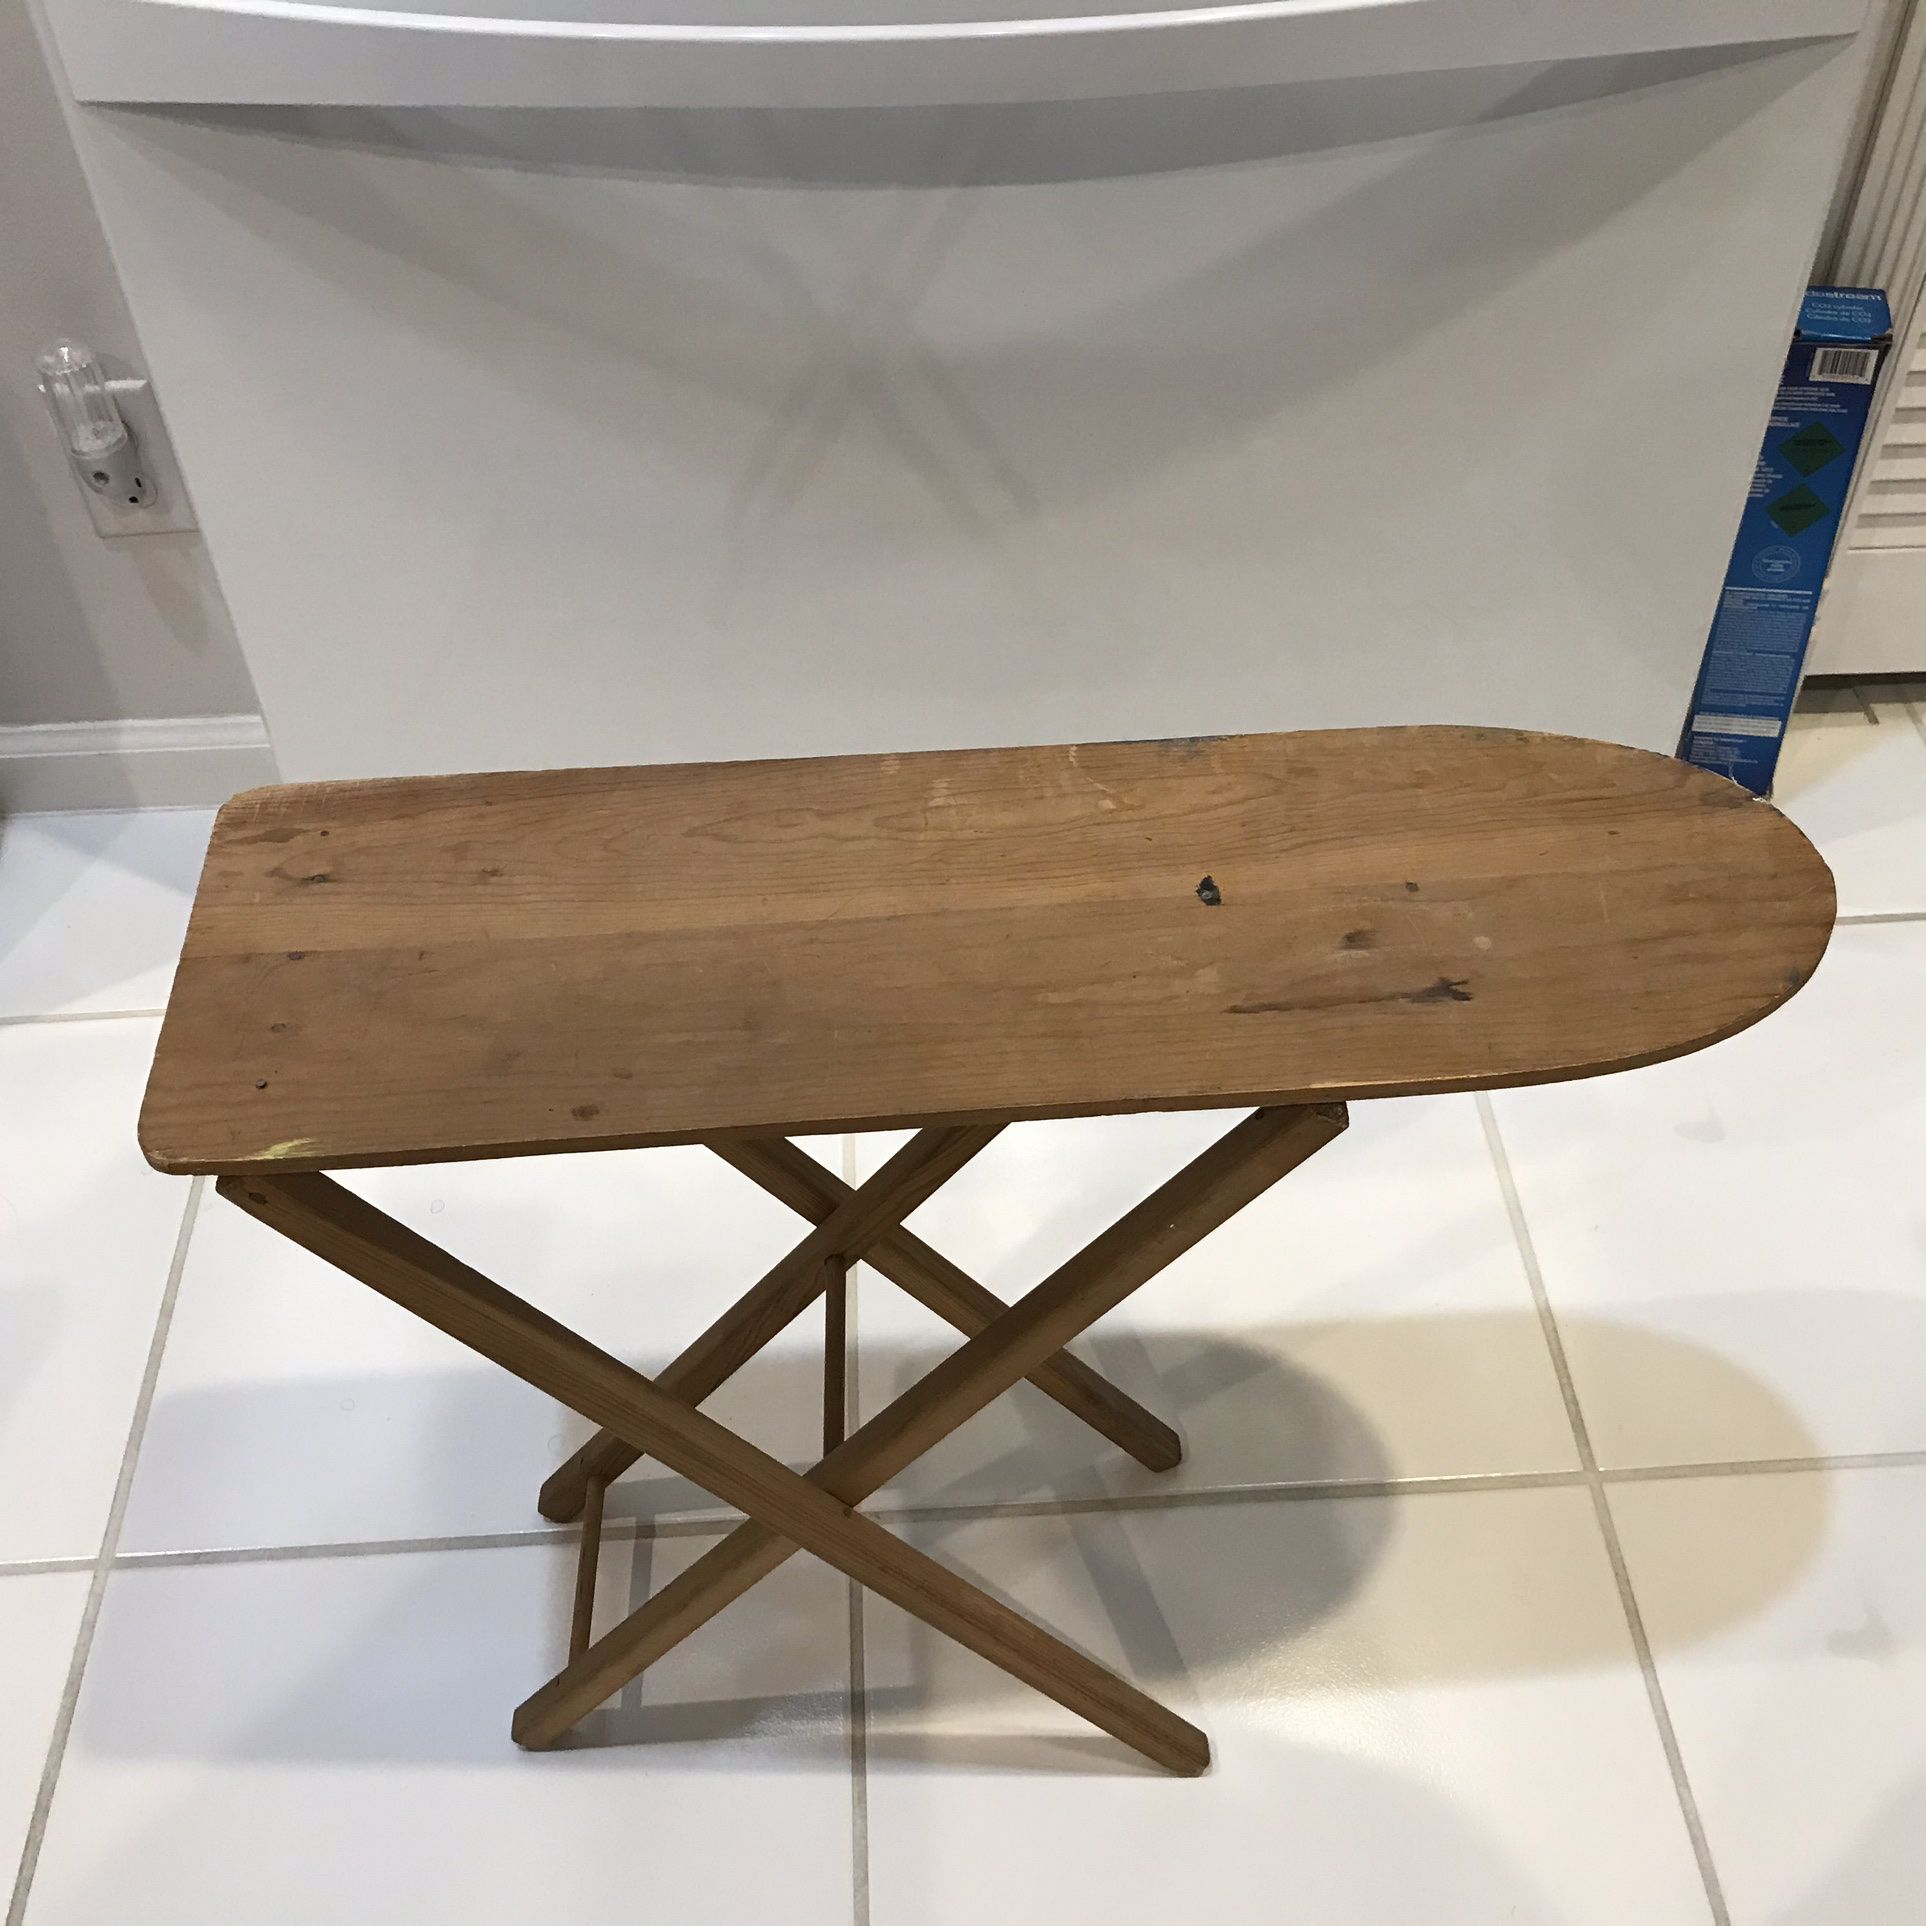 Toy Large Wooden Ironing Board Adjustable Height